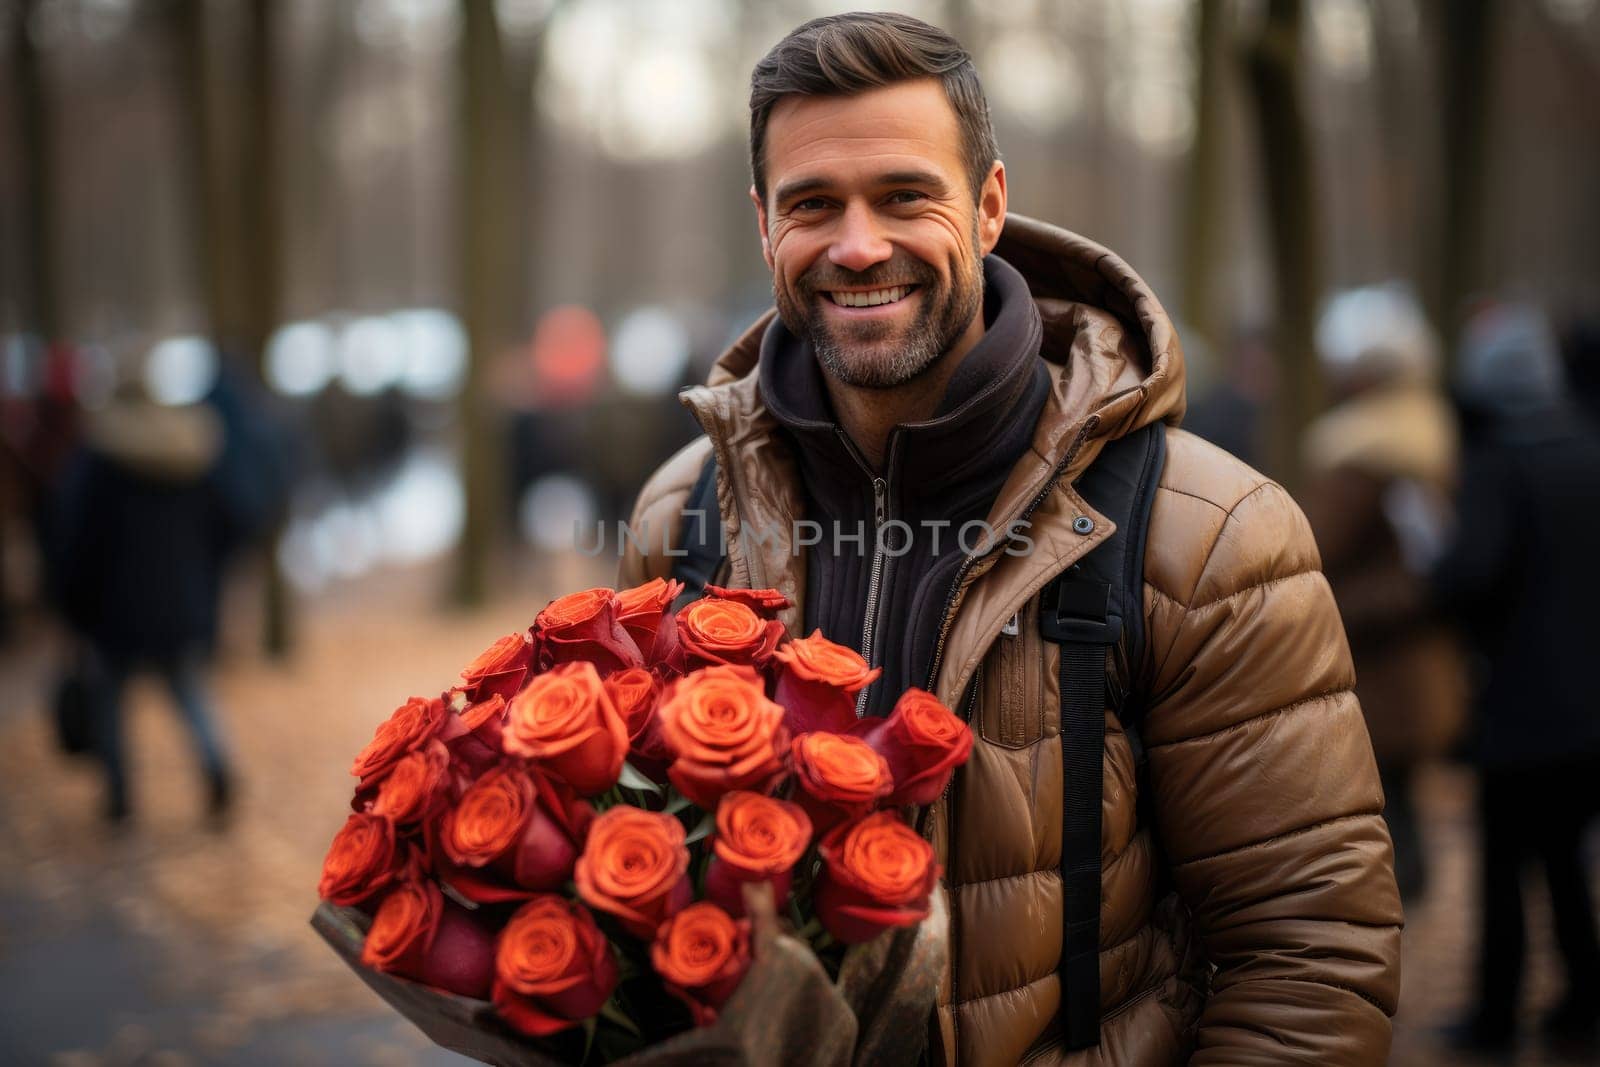 Valentine's Day Romance: Happy Man with Bouquet of Exquisite Pink Roses by Yurich32